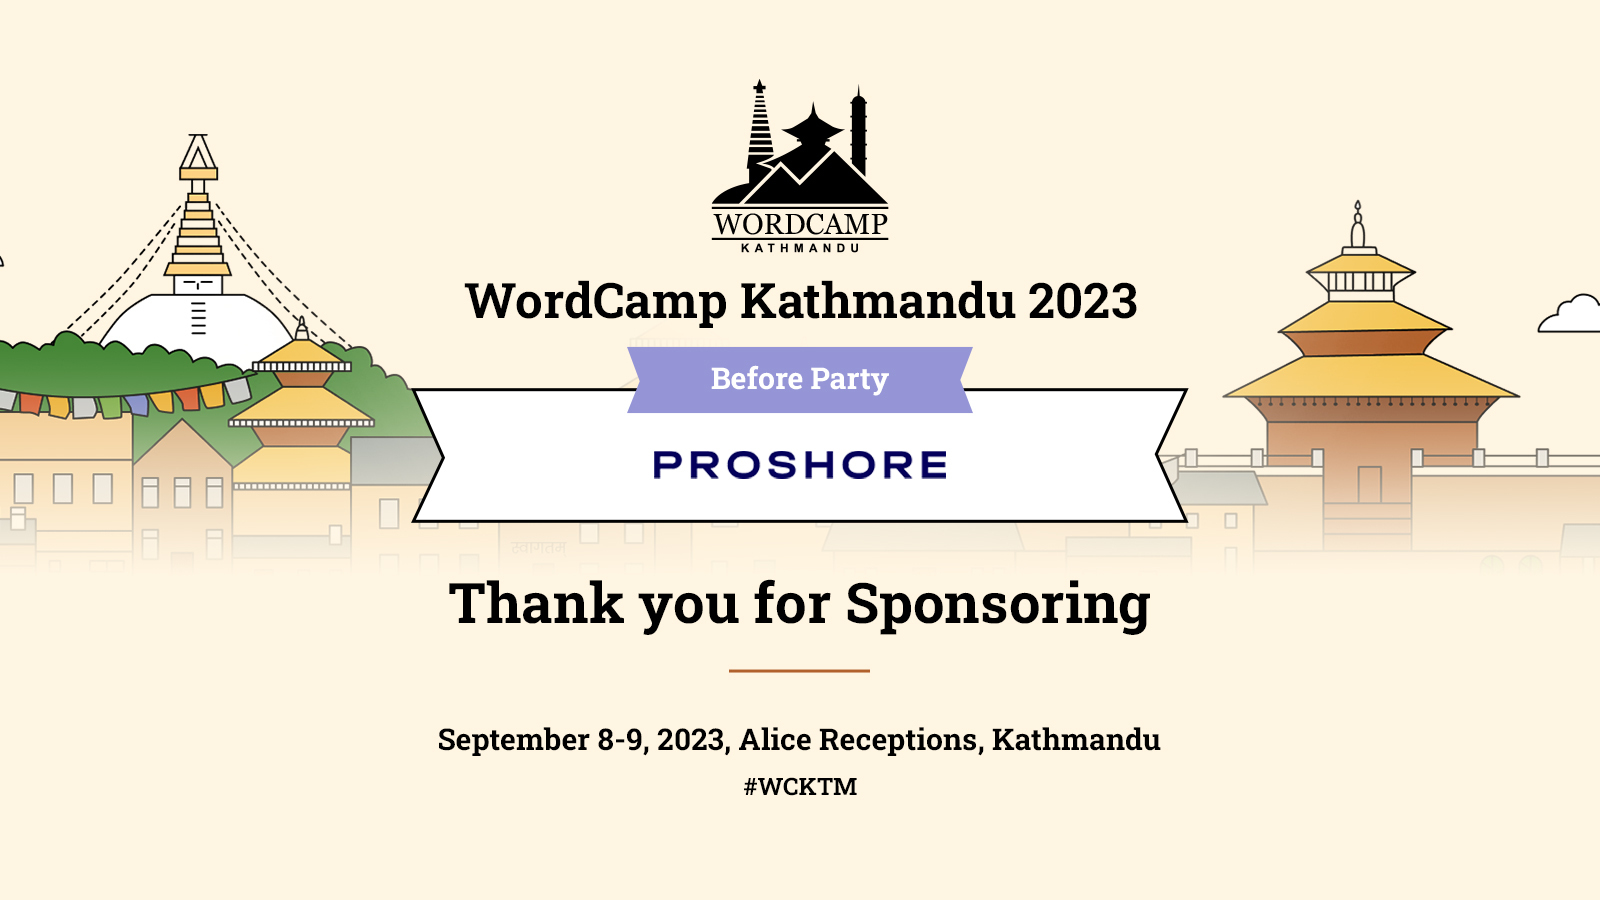 Thank you Proshore for sponsoring